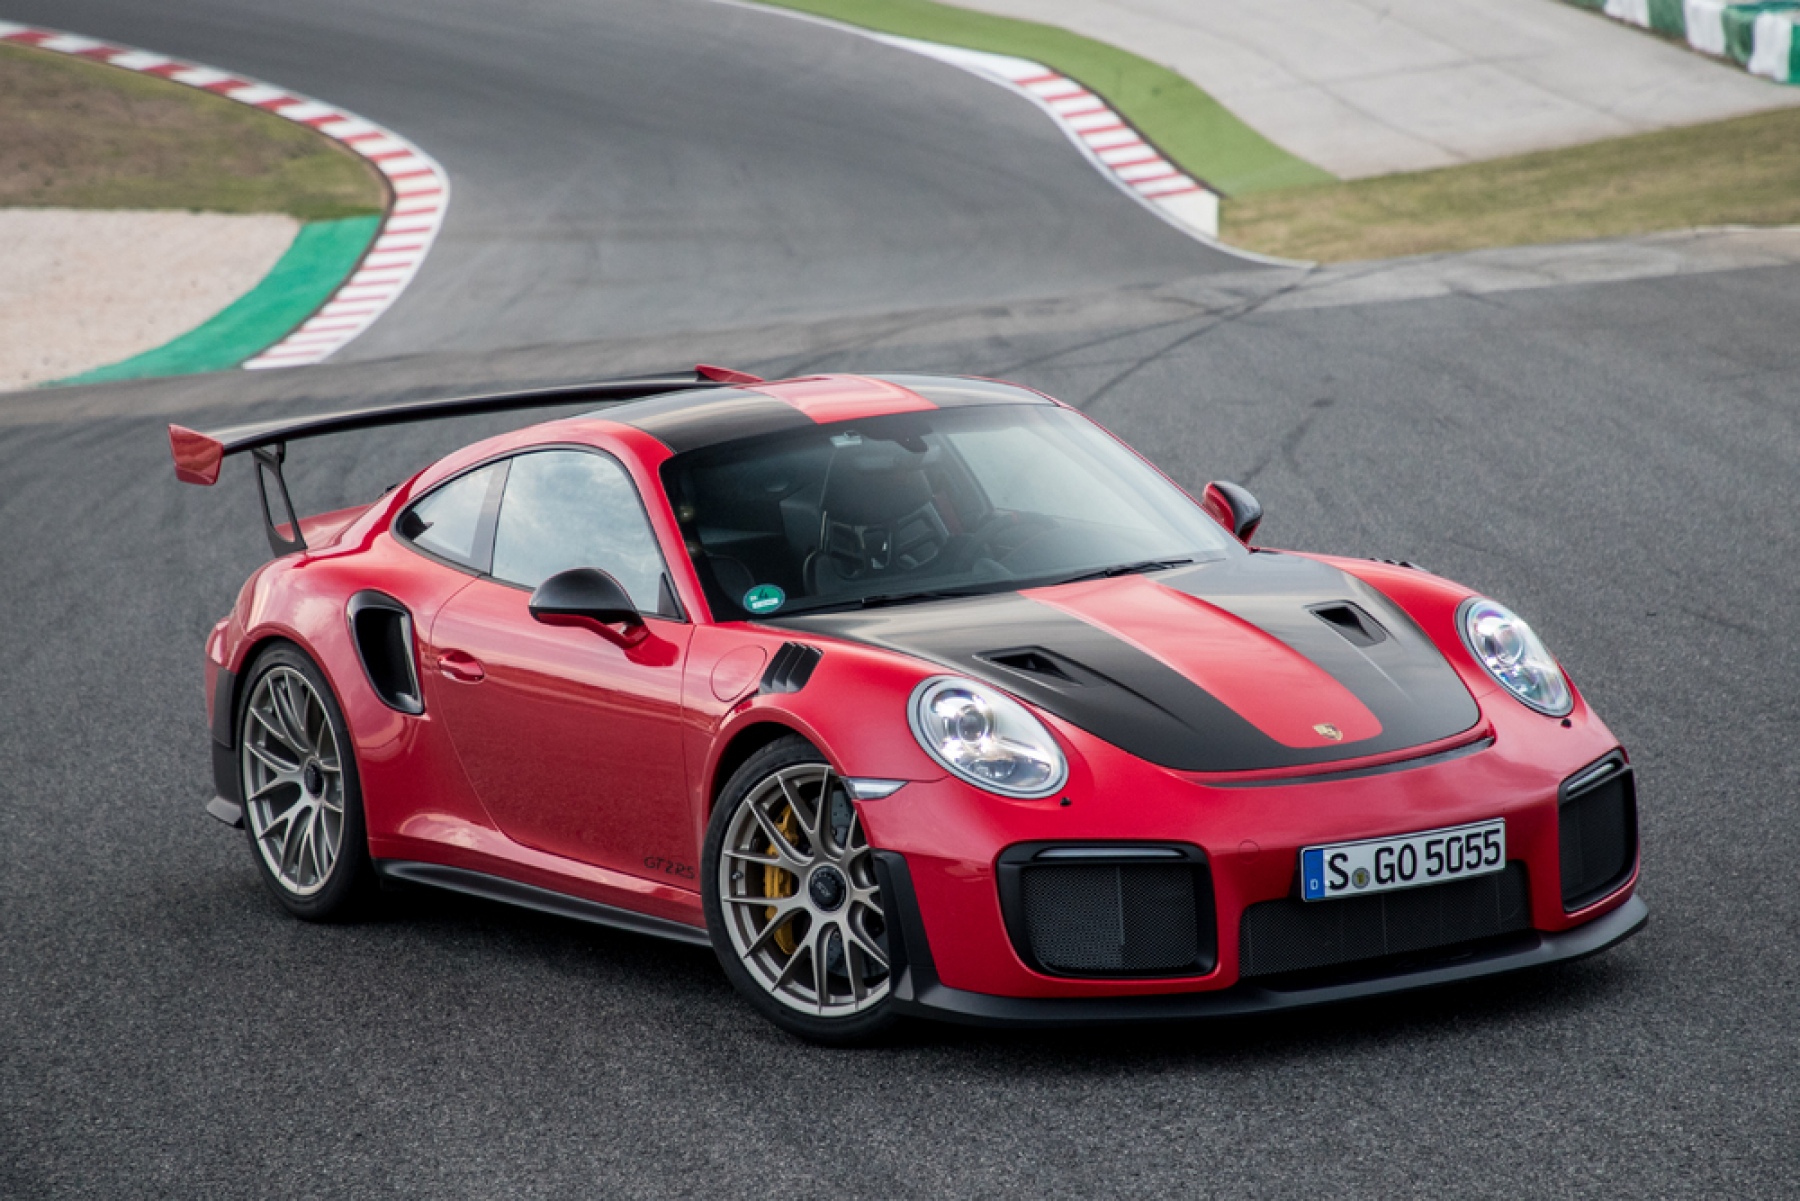 2018 Type 991 Porsche 911 GT2 RS Manthey Racing edition